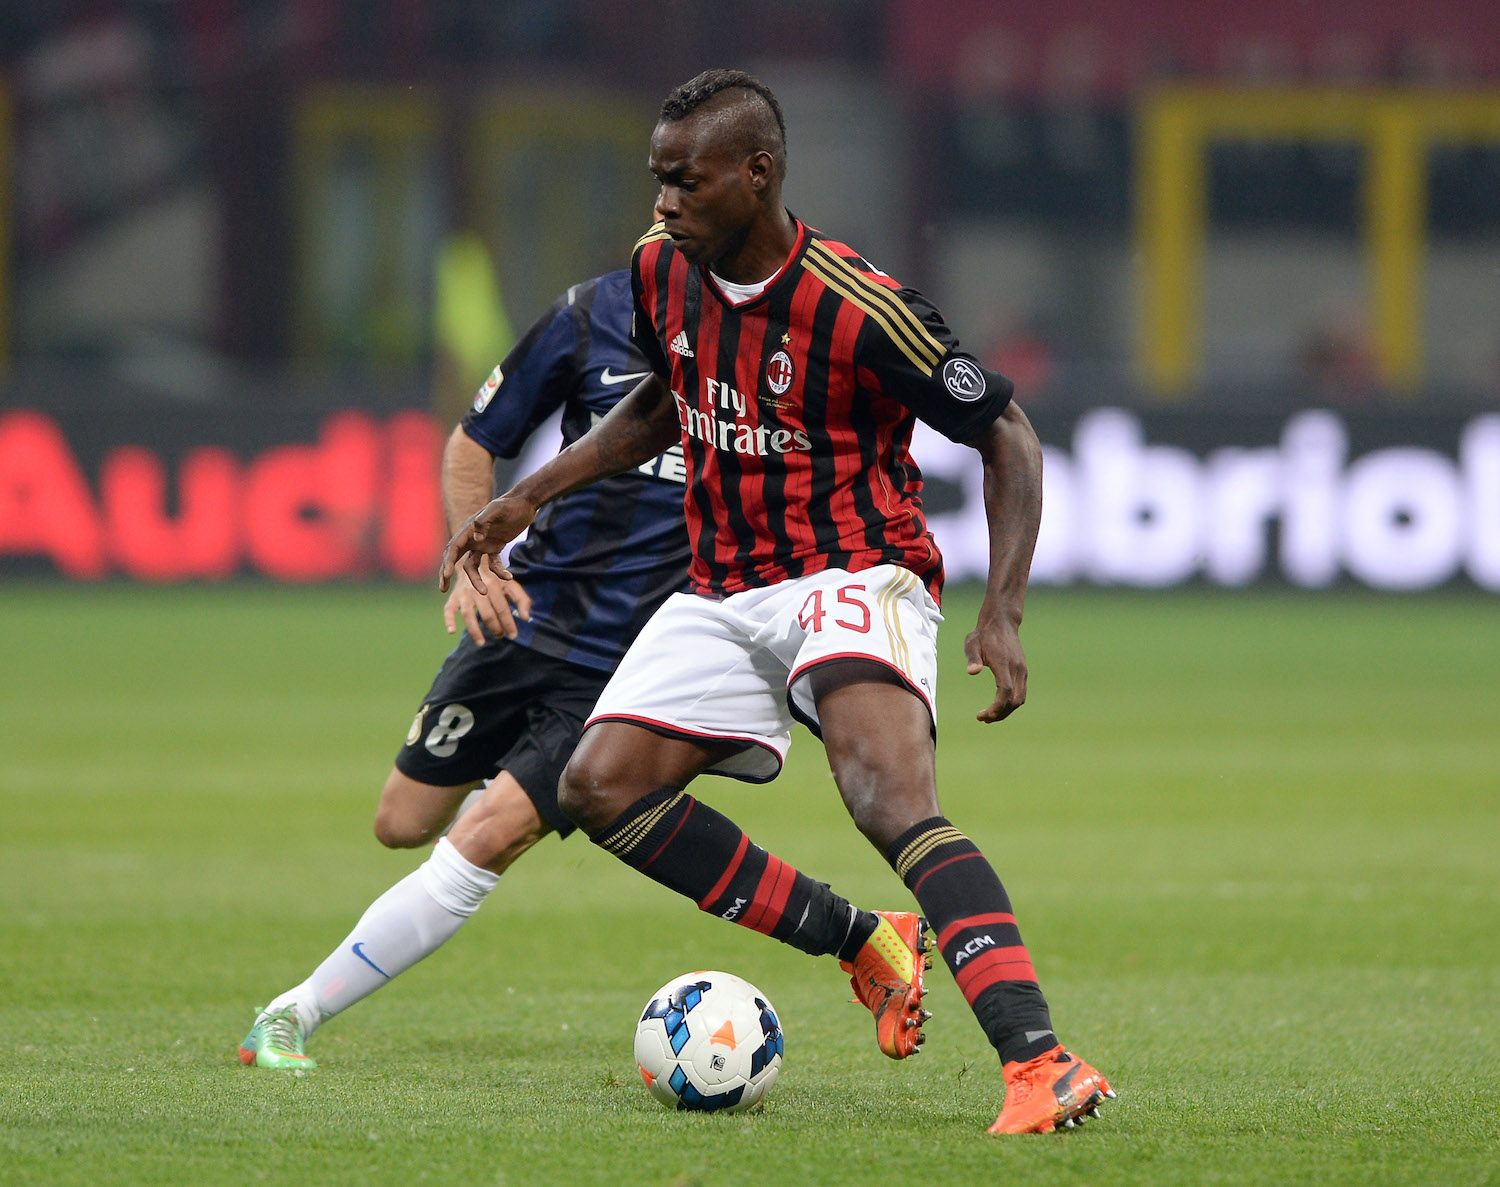 Mario Balotelli battles for possession in the derby against Inter back in 2014. | Image: getty